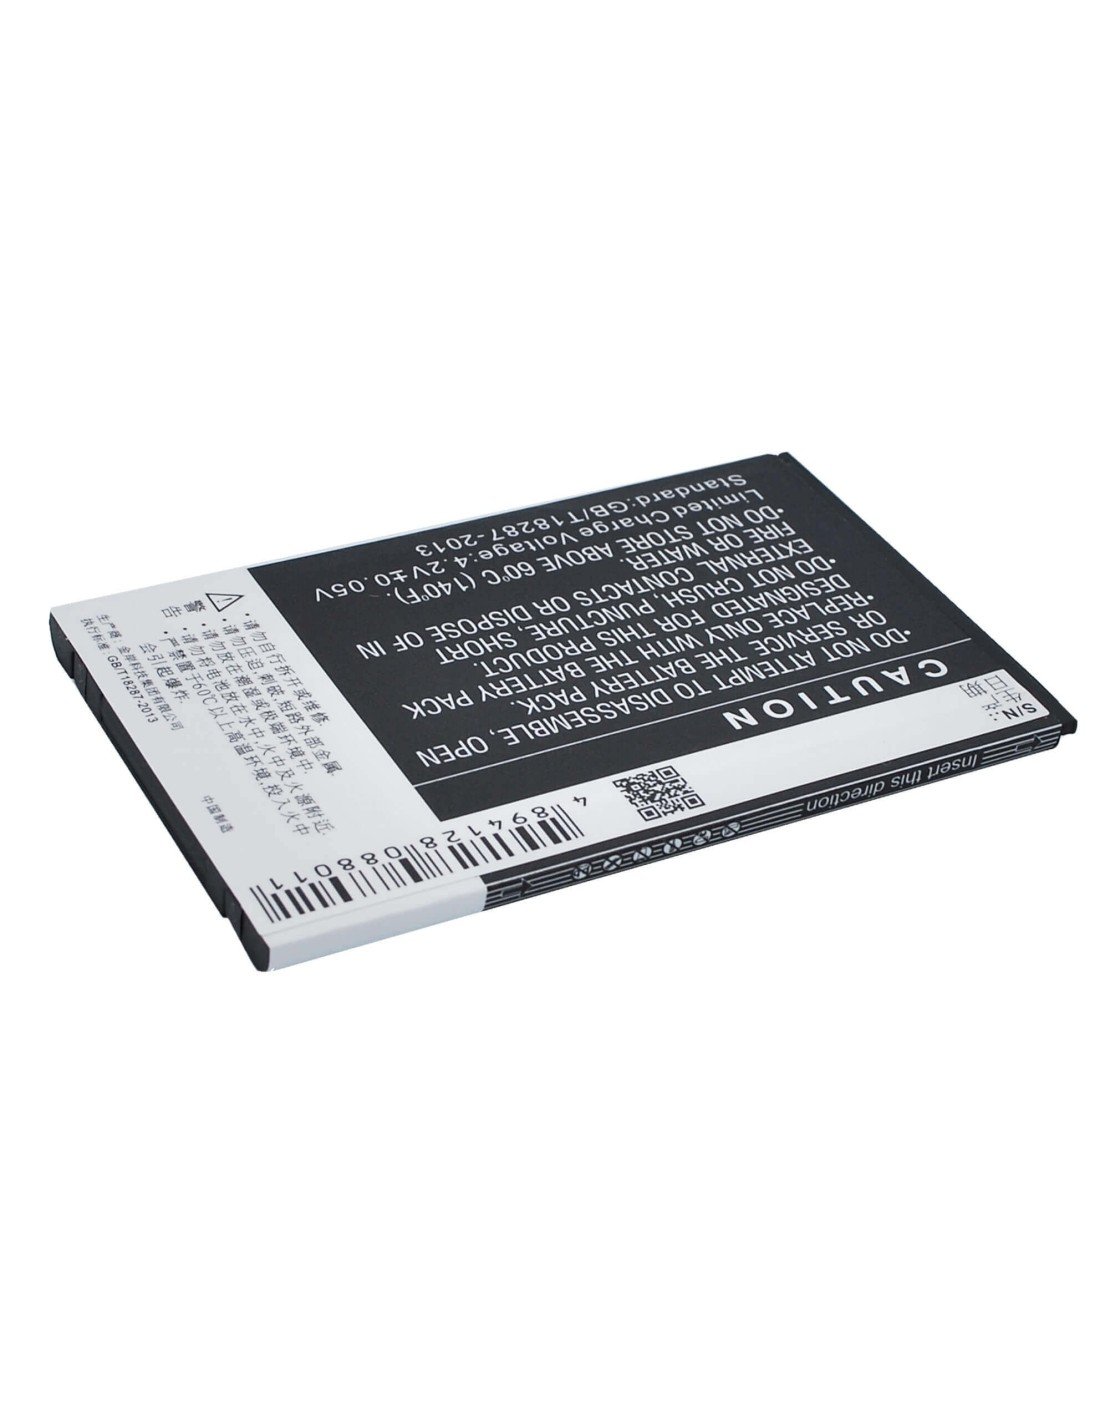 Battery for Coolpad 8022, 5110 3.7V, 1600mAh - 5.92Wh